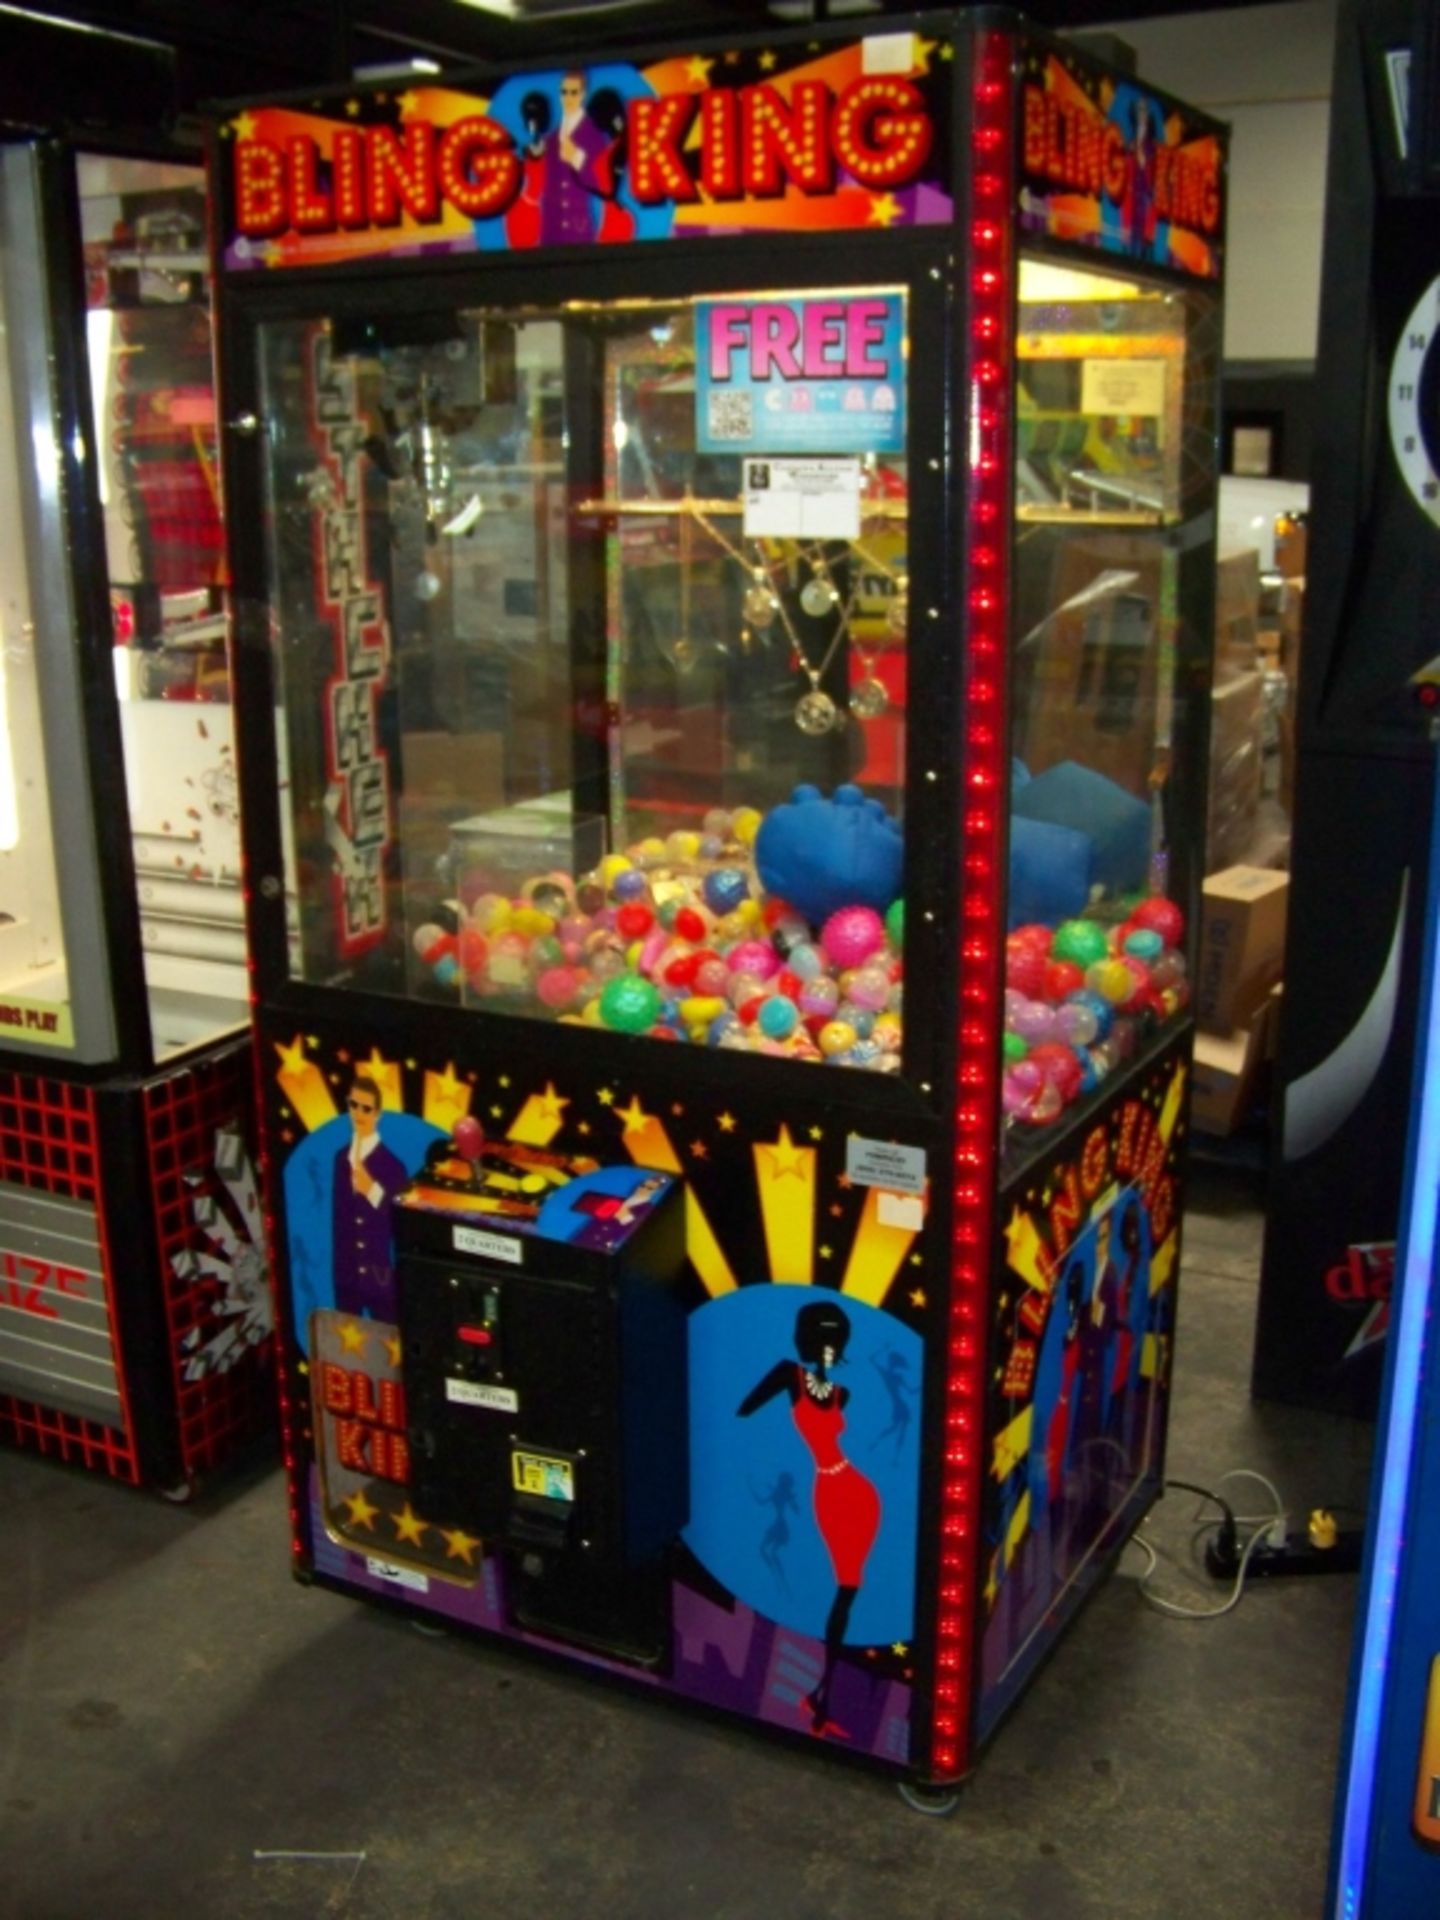 42" BLING KING JEWELRY CLAW CRANE MACHINE - Image 2 of 3